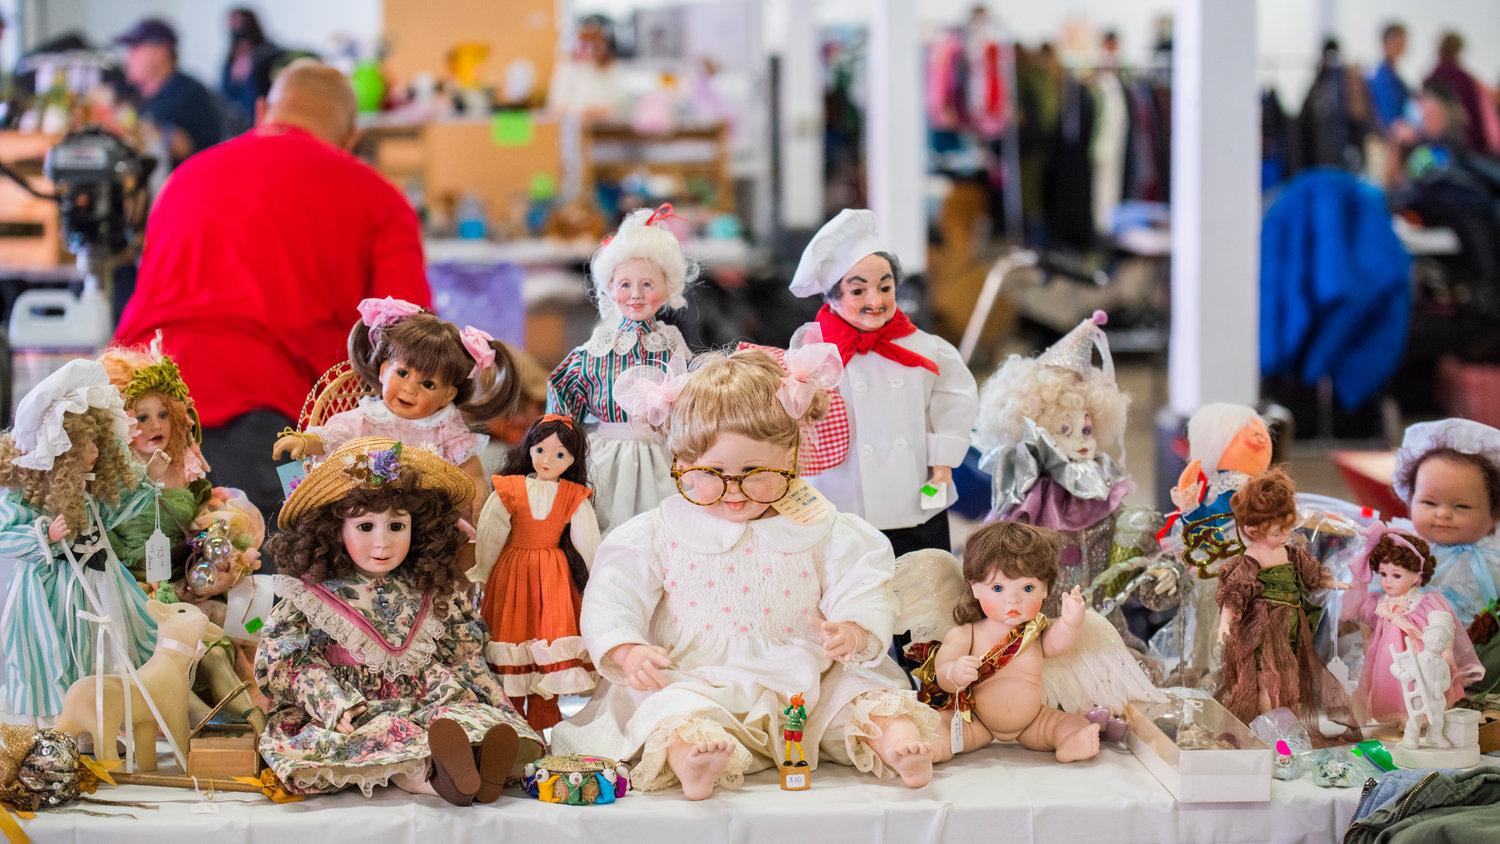 Vintage dolls sit on display during the Spring Community Garage Sale at the Southwest Washington Fairgrounds Saturday morning in Centralia.